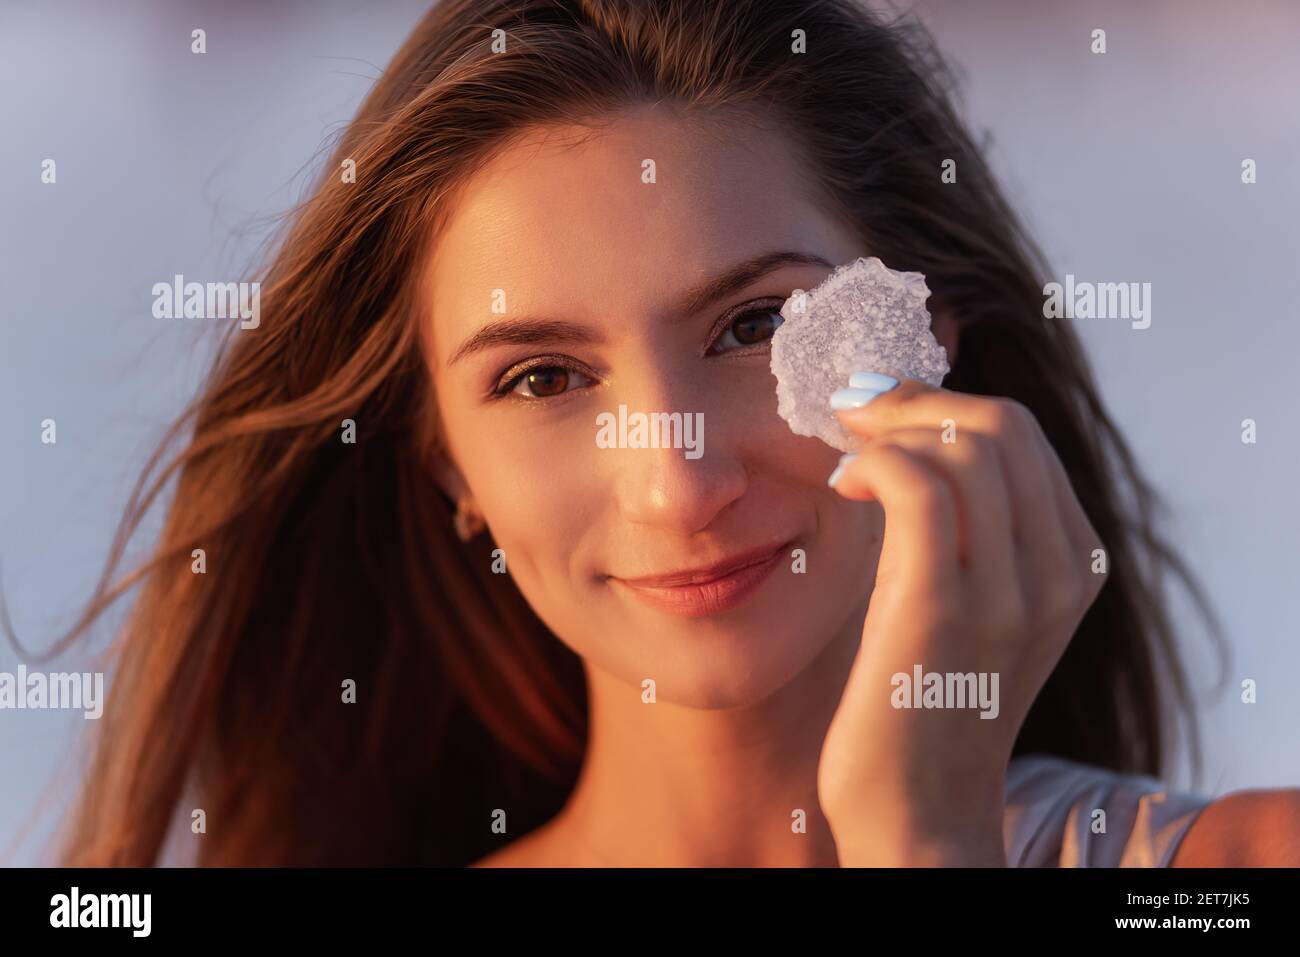 Close-up portrait of a young blonde woman holding a piece of crystallized white  salt in her hands. Girl with natural make-up, hair is developing. Salt  Stock Photo - Alamy